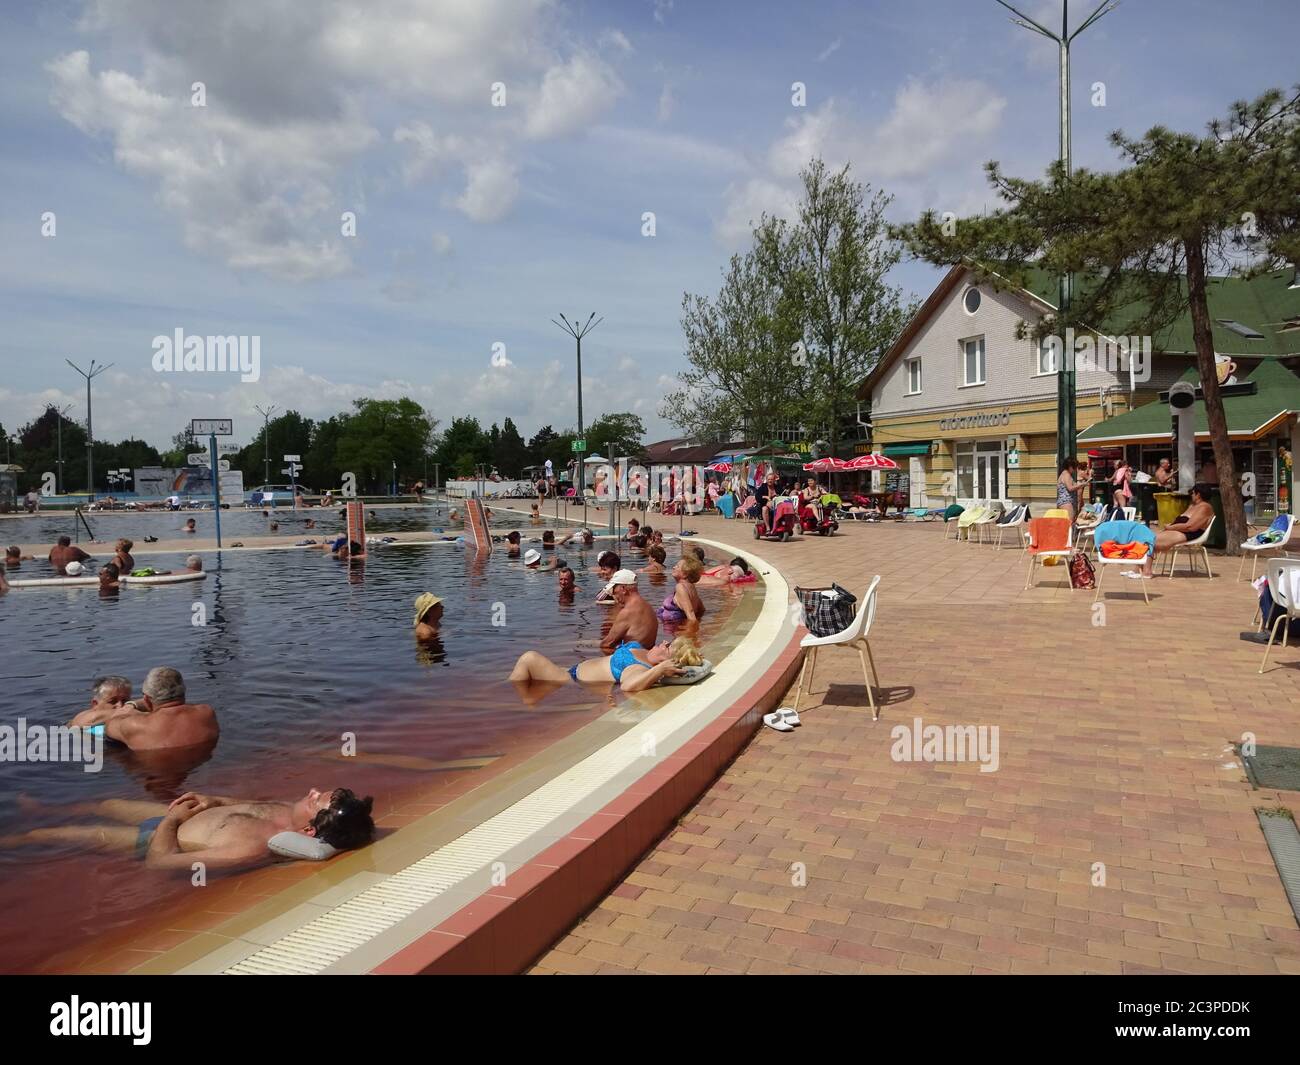 Thermal pools and the city of Hajduszoboszlo in Hungary. Only positive  emotions! a great place for wellness tourism Stock Photo - Alamy